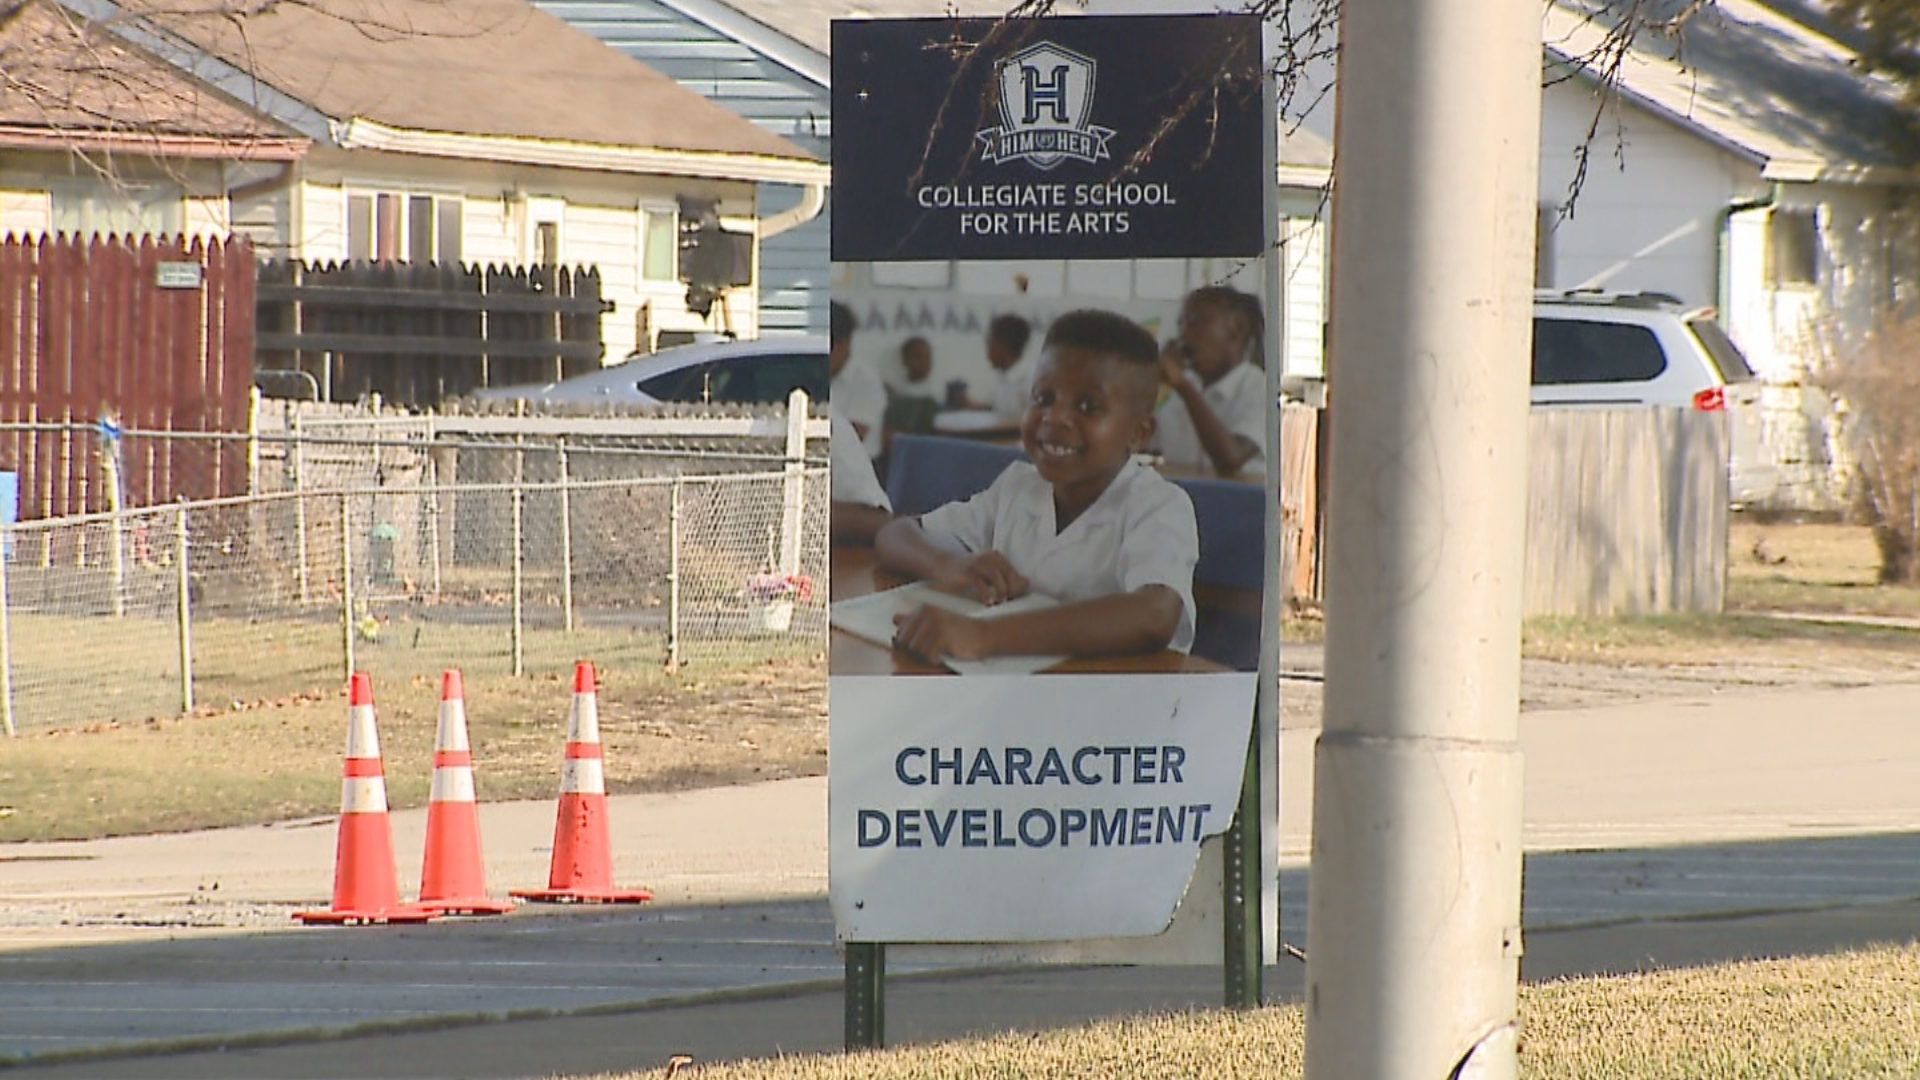 Community groups call on Indianapolis to stop approving charter schools